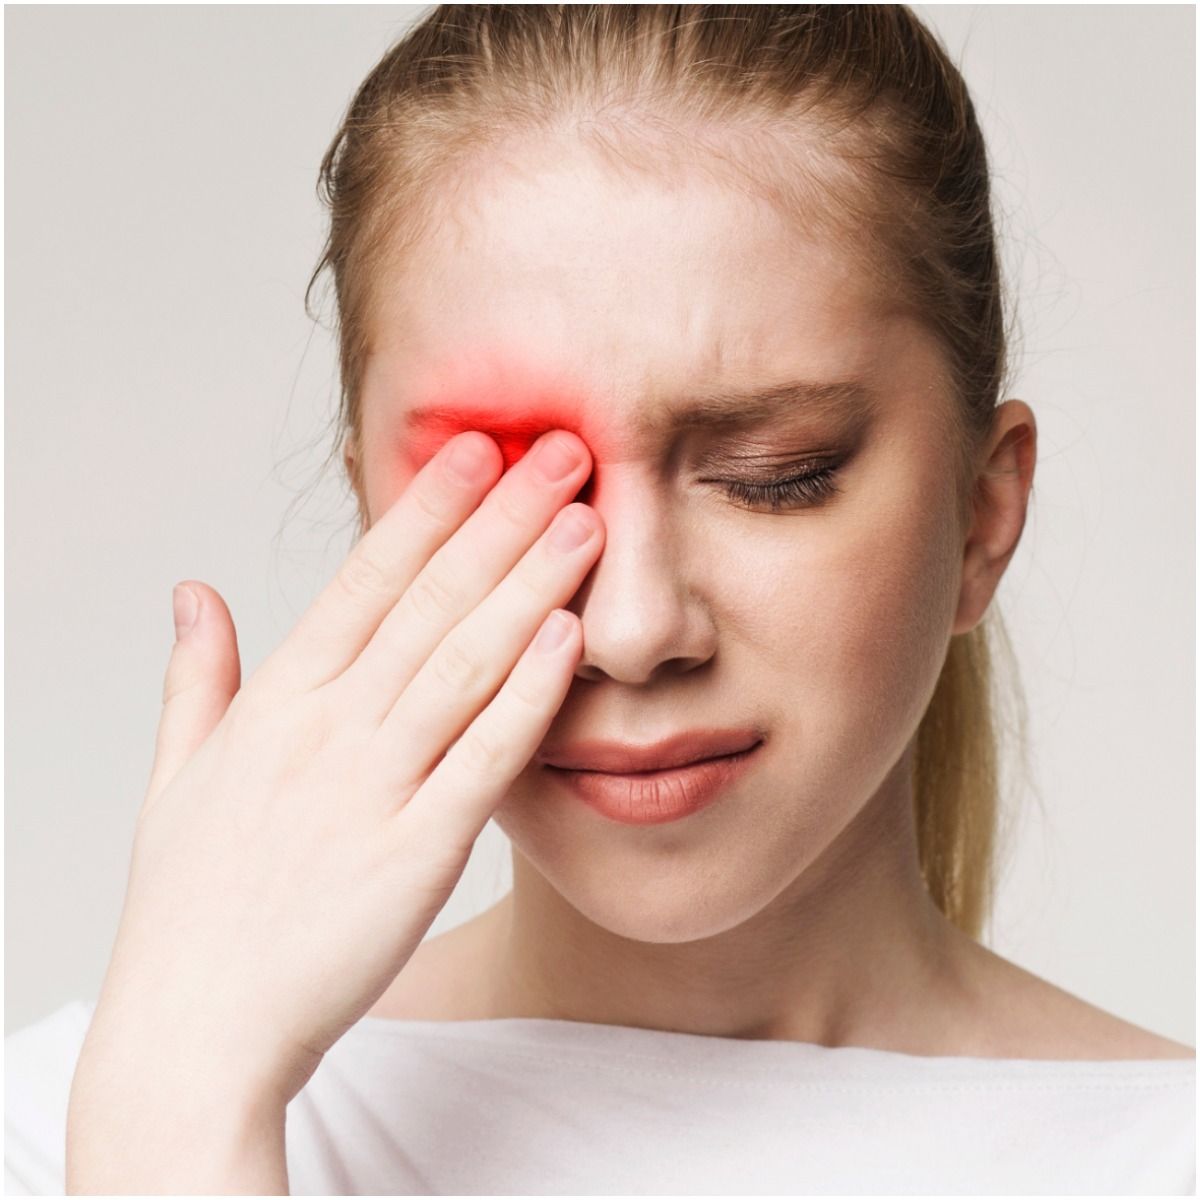 Spiritual Meaning Of Conjunctivitis